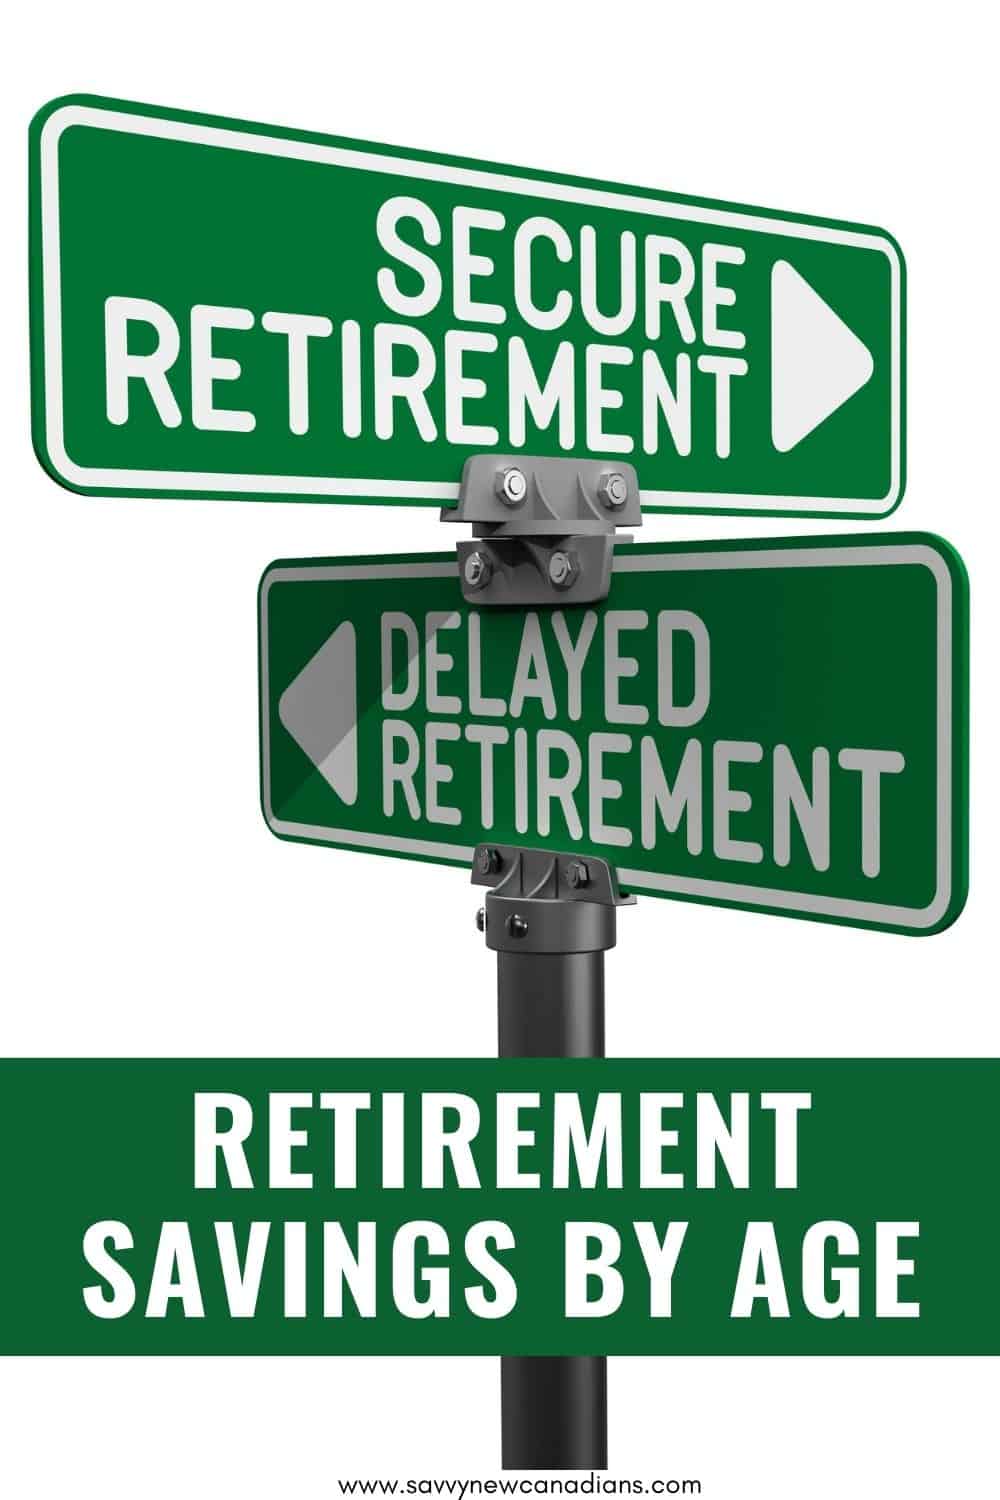 Retirement Savings by Age: How Much Money Should You Have Saved at 20, 30, 40, 50 or 60?